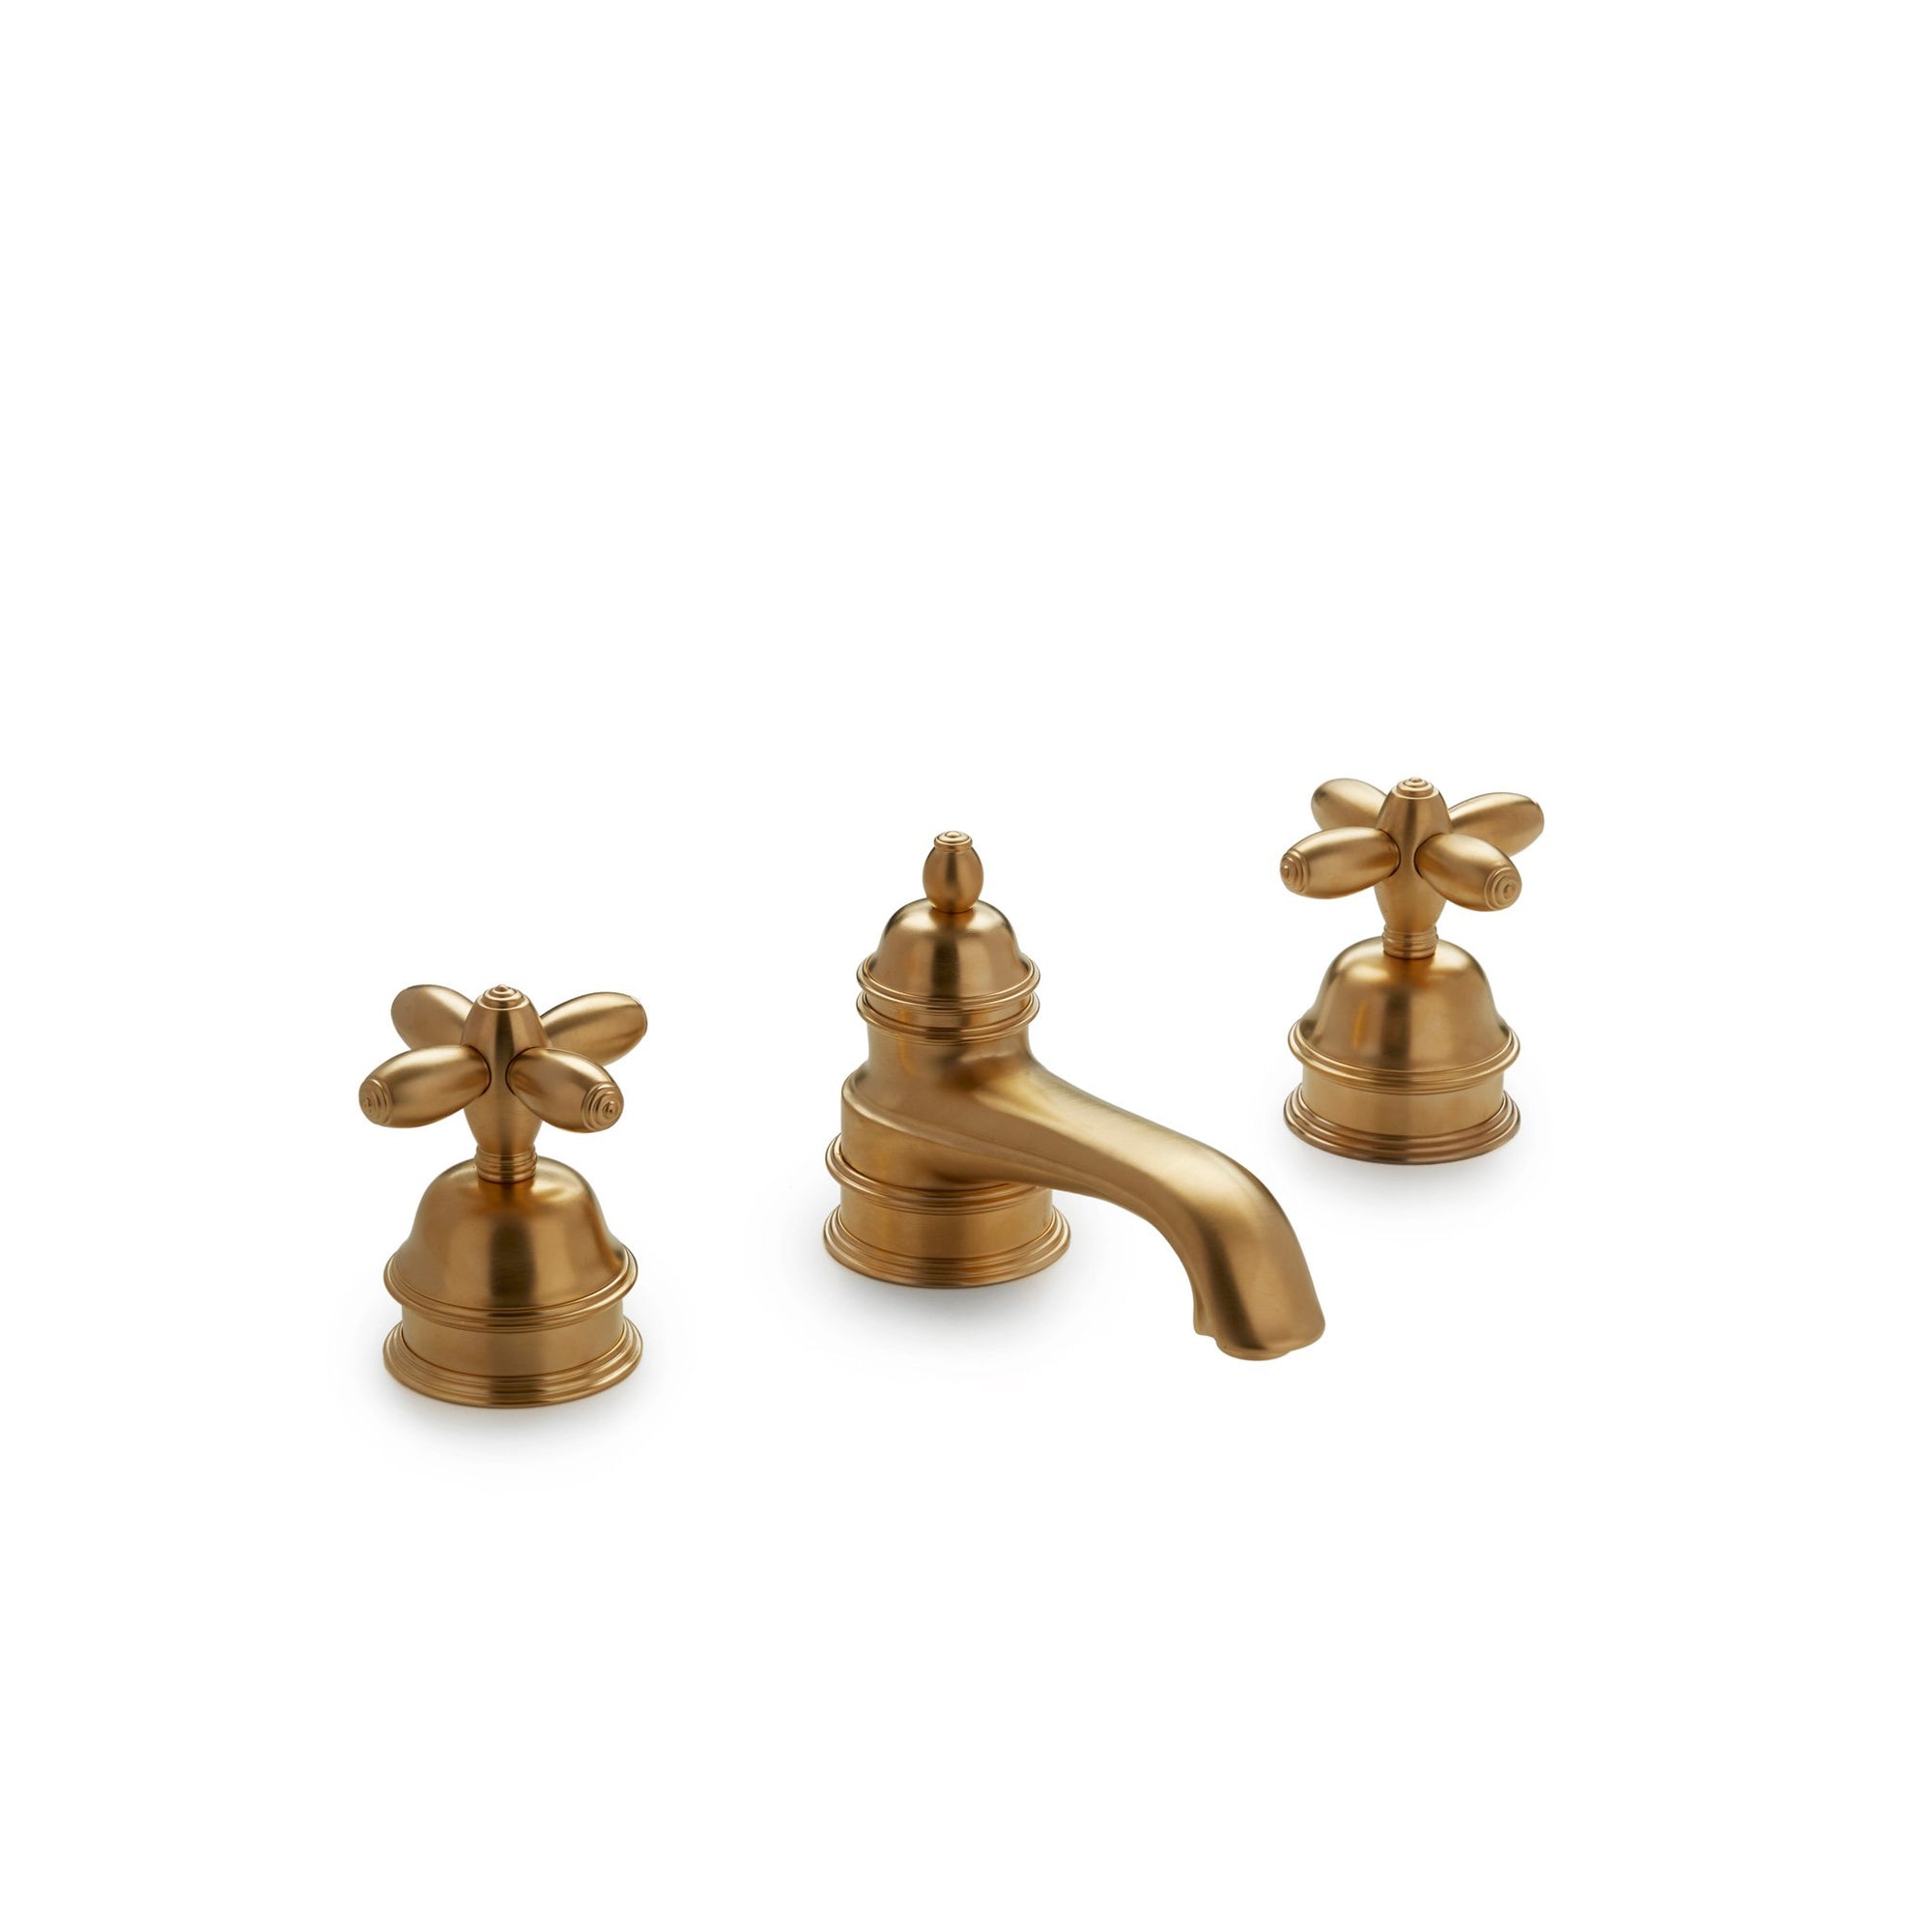 0991BSN-GP Sherle Wagner International Grey Series I Lever Faucet Set in Gold Plate metal finish